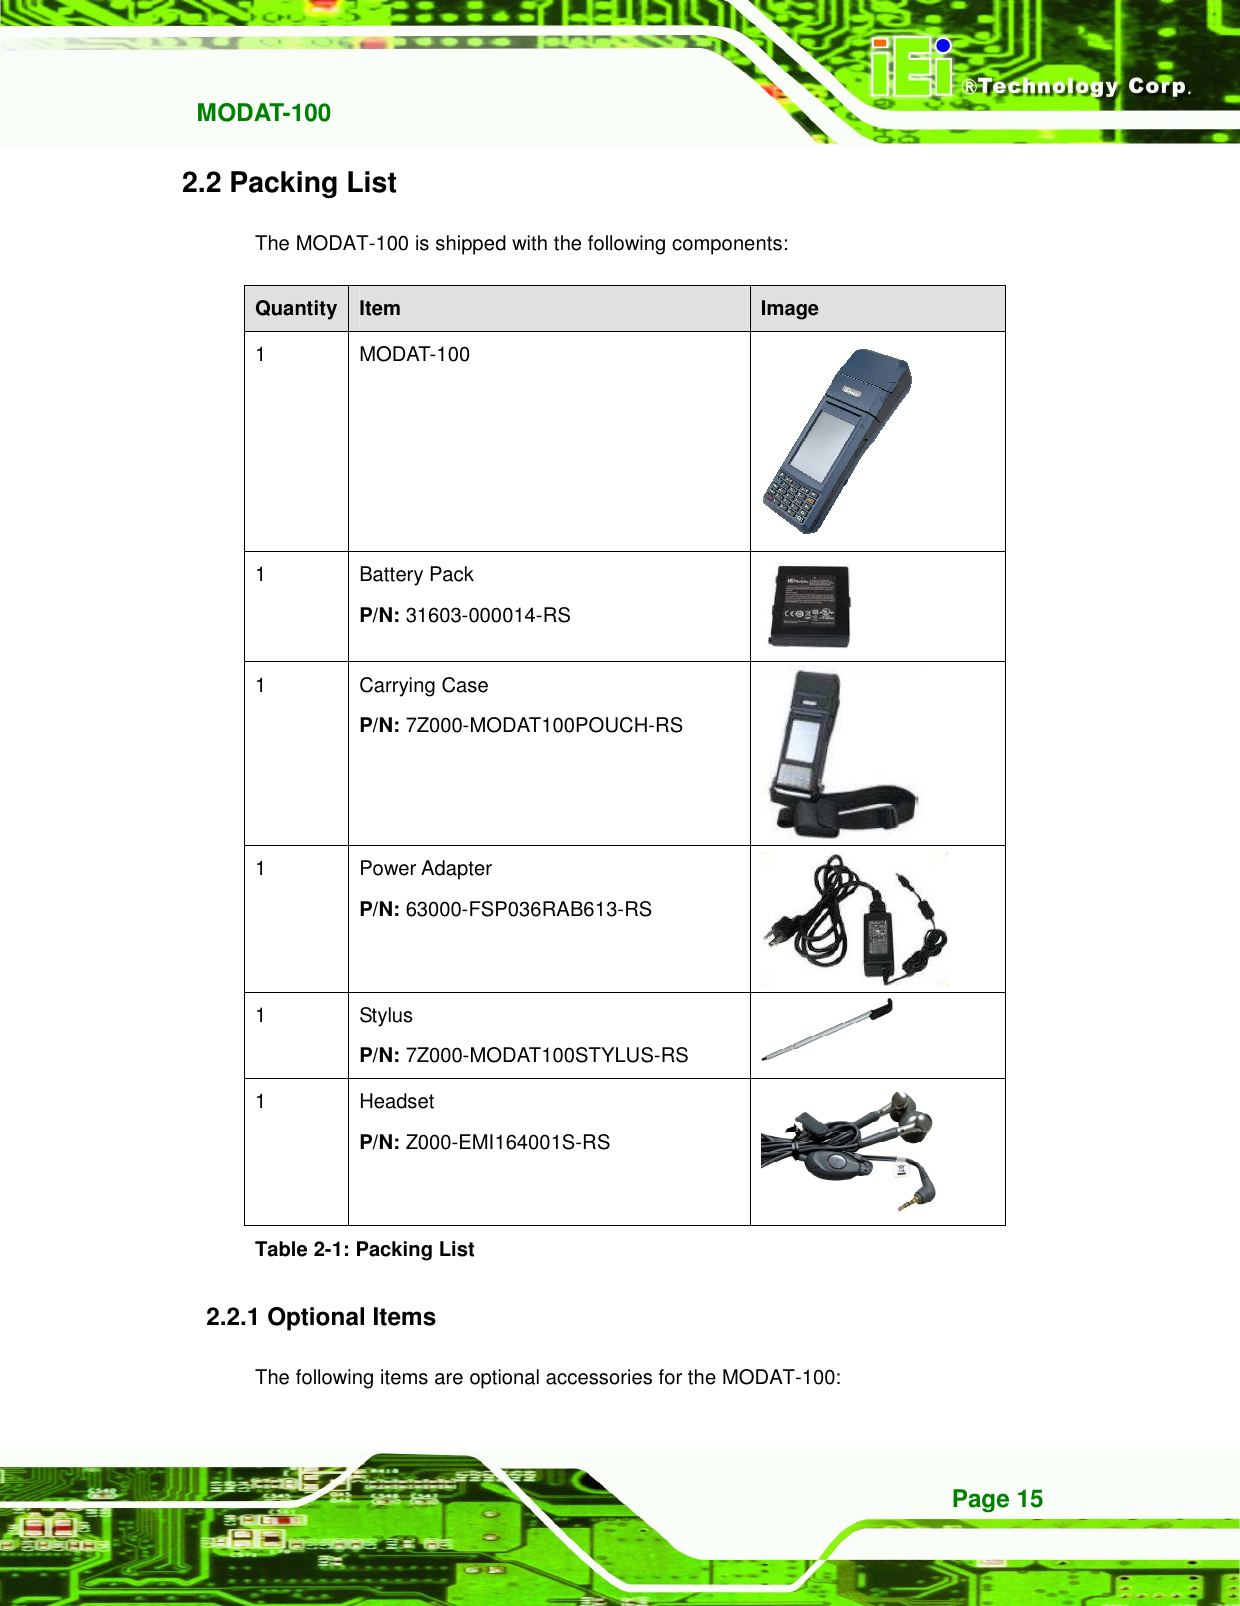   MODAT-100 Page 15 2.2 Packing List The MODAT-100 is shipped with the following components: Quantity Item  Image 1  MODAT-100  1  Battery Pack P/N: 31603-000014-RS  1  Carrying Case P/N: 7Z000-MODAT100POUCH-RS  1  Power Adapter P/N: 63000-FSP036RAB613-RS  1  Stylus P/N: 7Z000-MODAT100STYLUS-RS  1  Headset P/N: Z000-EMI164001S-RS  Table 2-1: Packing List 2.2.1 Optional Items The following items are optional accessories for the MODAT-100: 